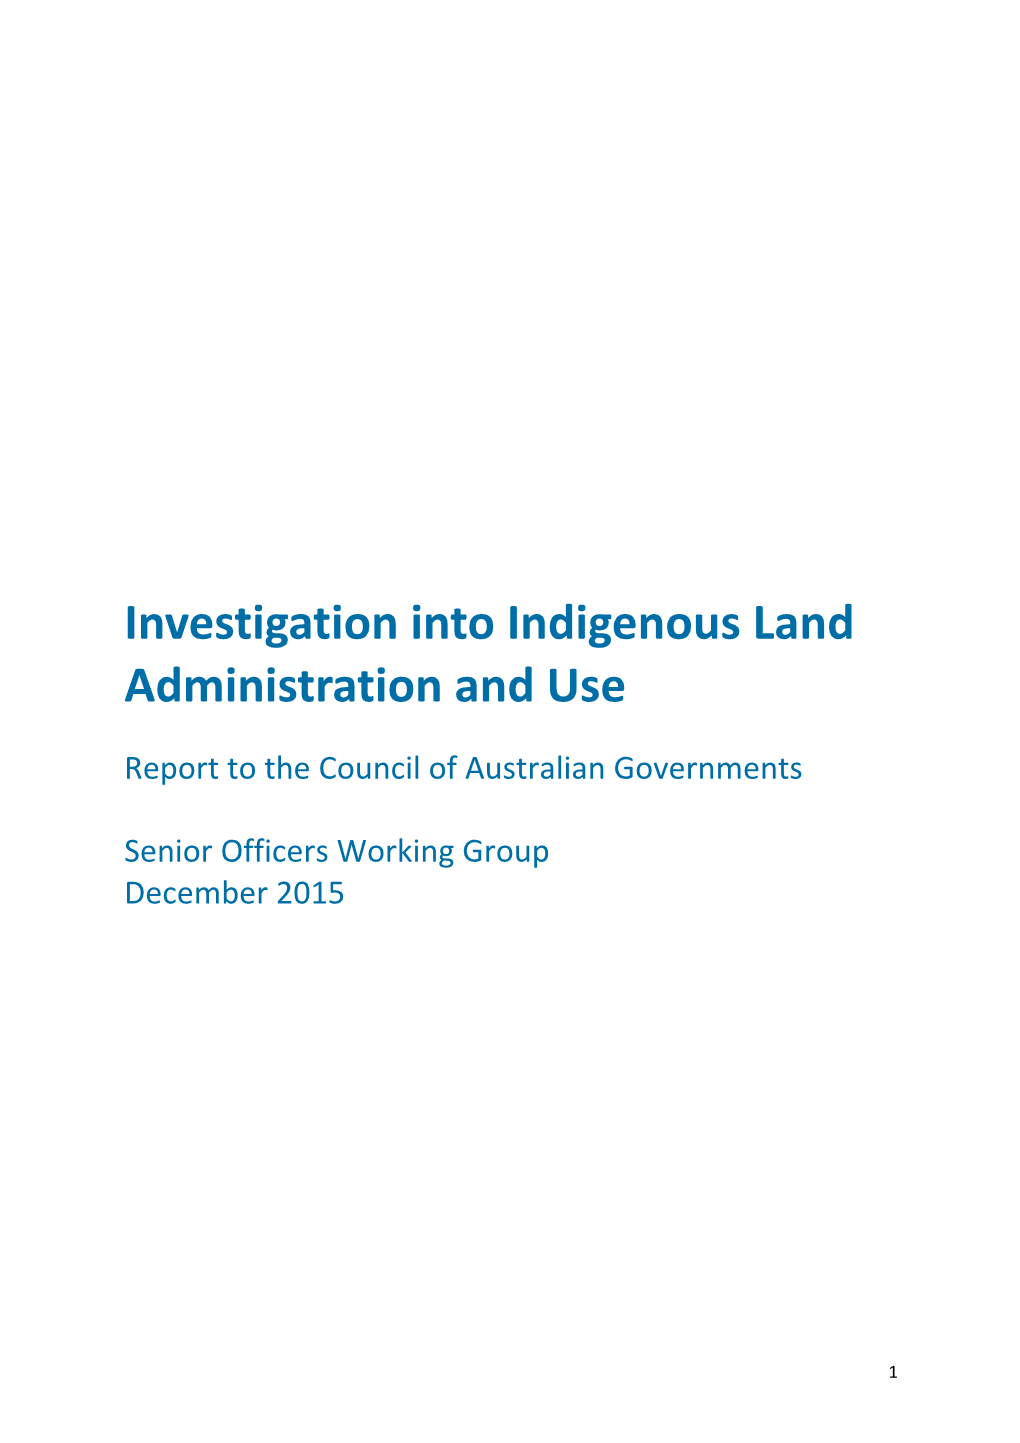 Investigation Into Indigenous Land Administration and Use